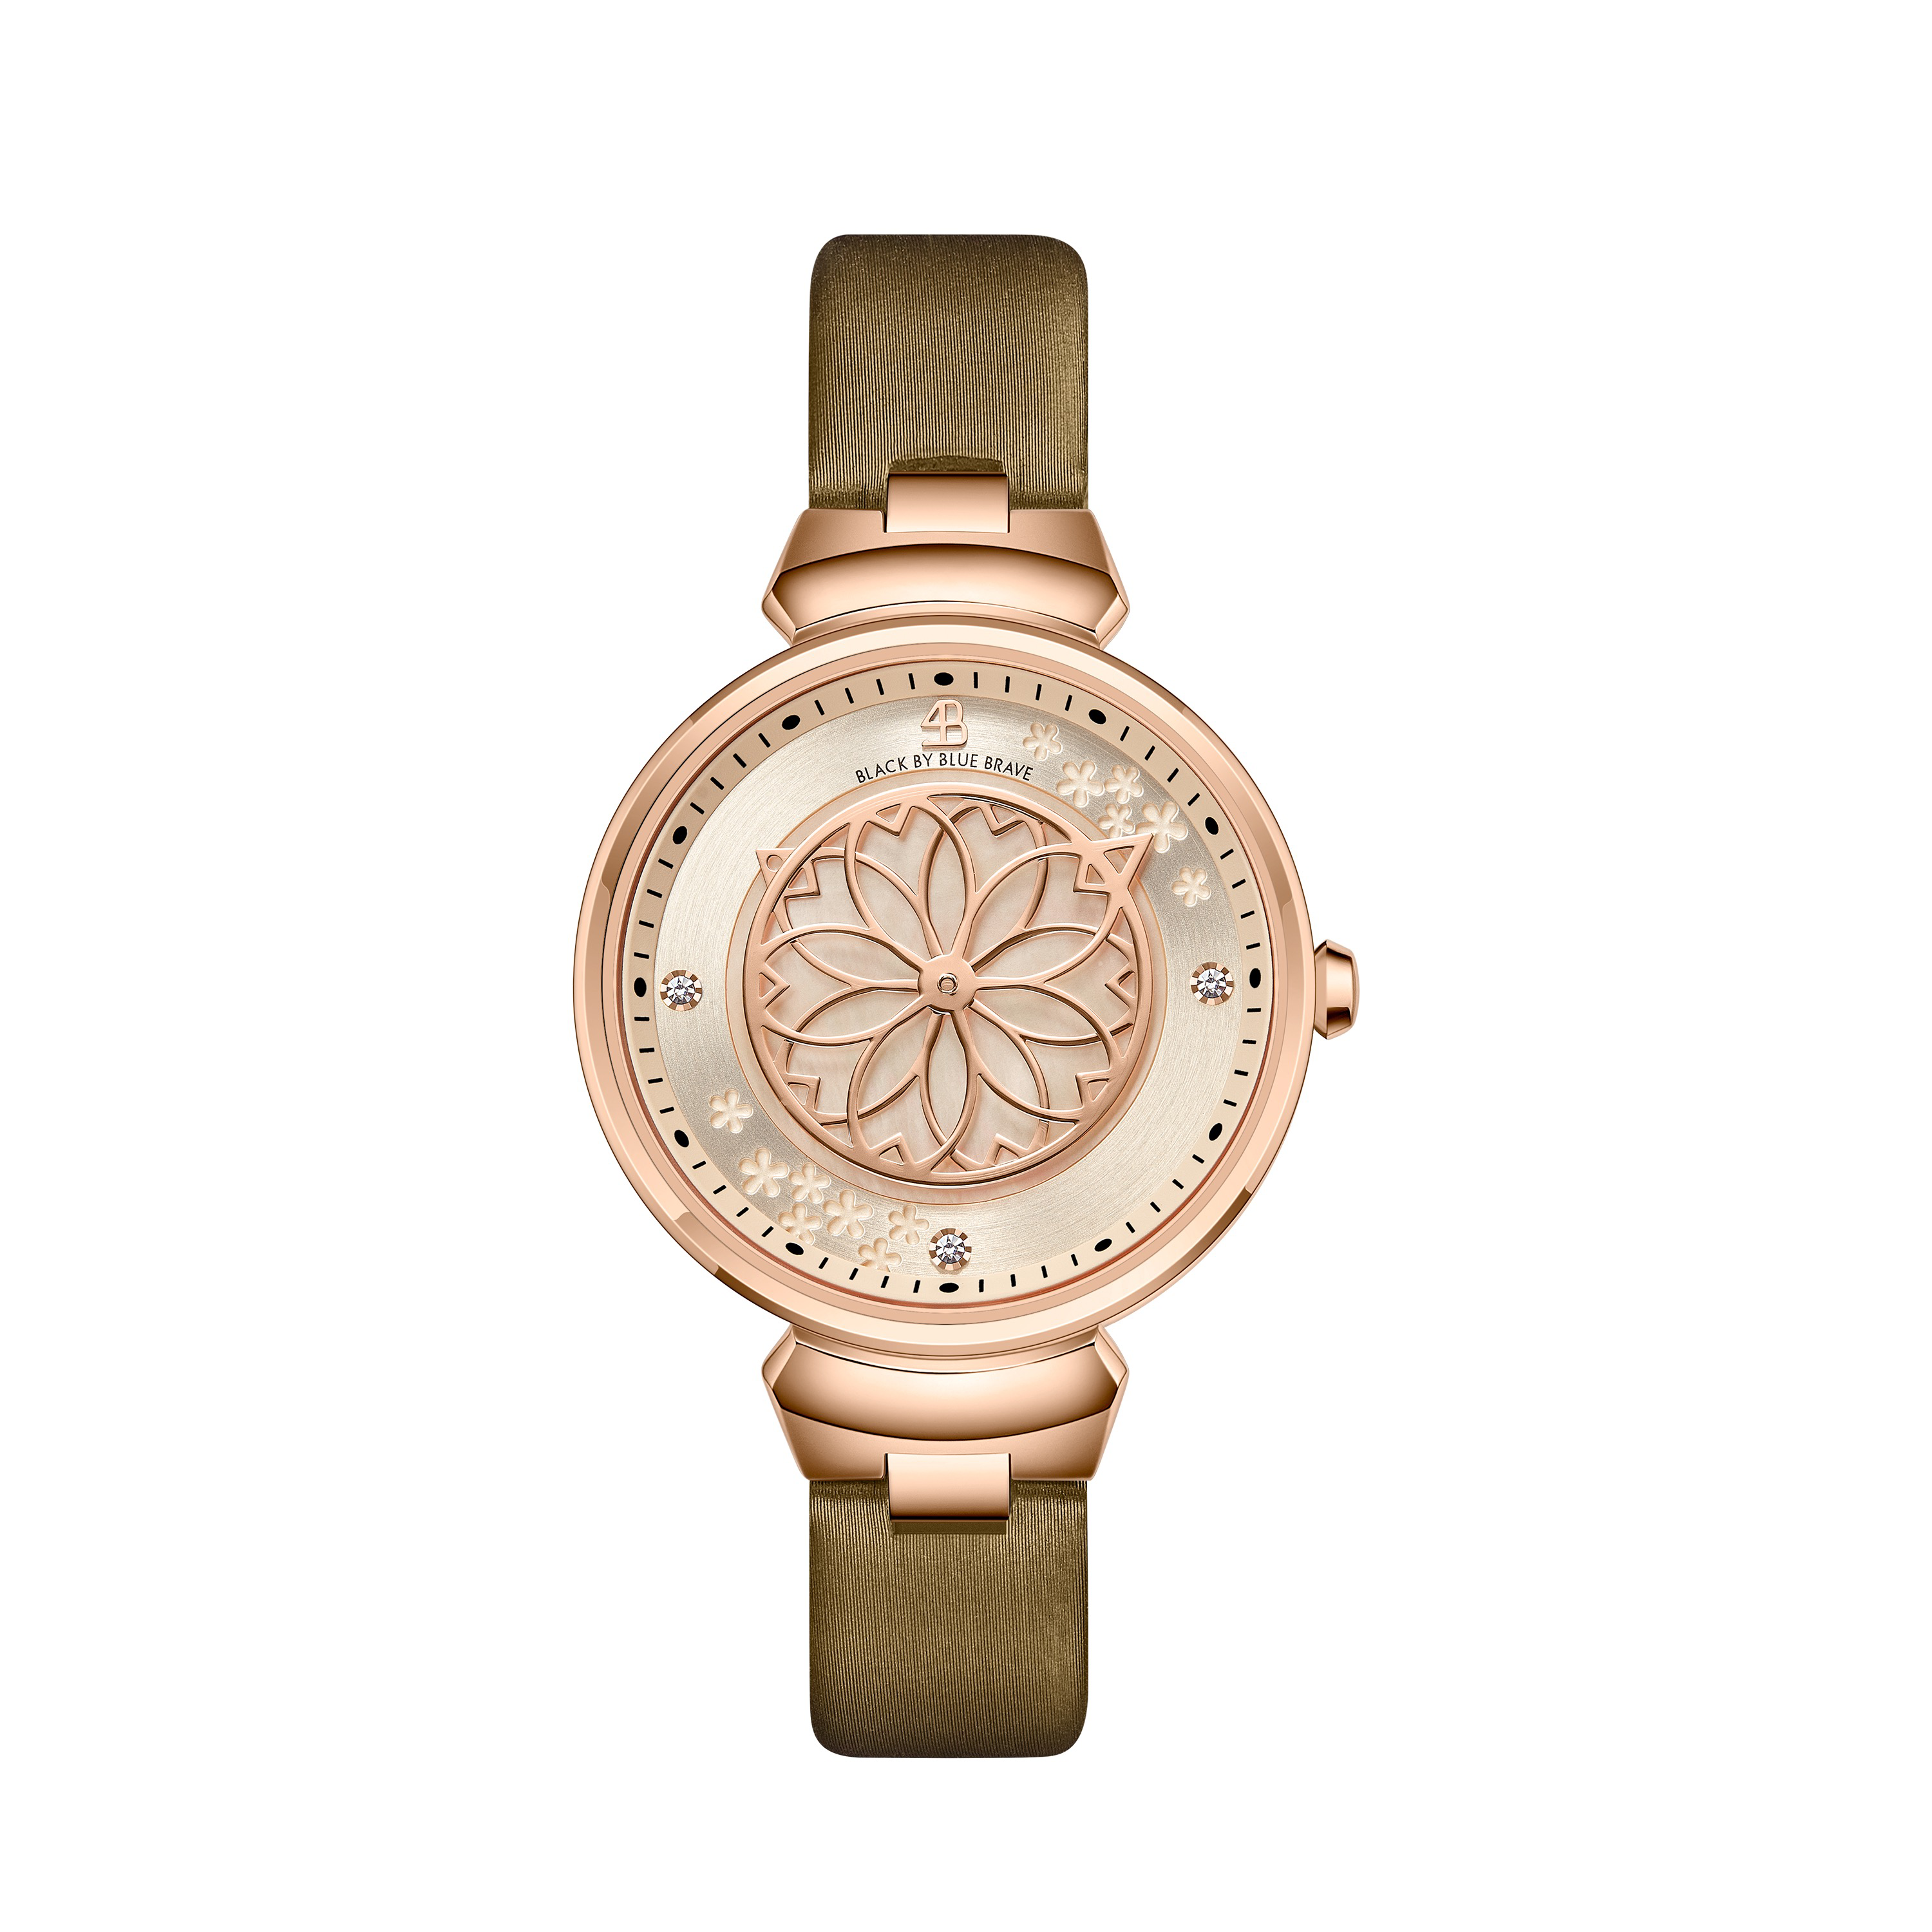 Champagne Cherry Blossom Watch With Rosegold Flower Necklace & White Ceramic